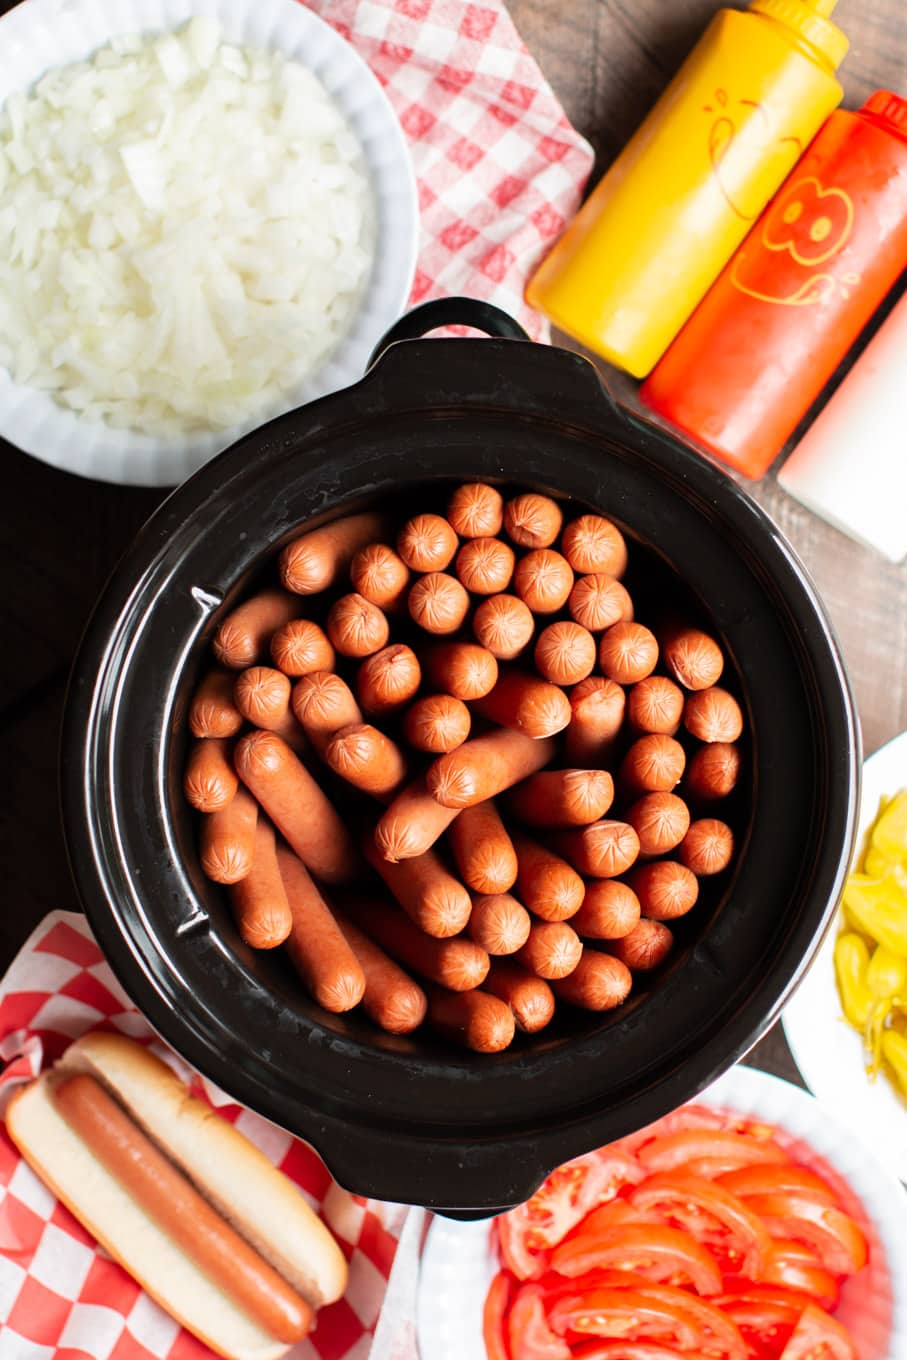 cooked hot dogs in a round slow cooker.